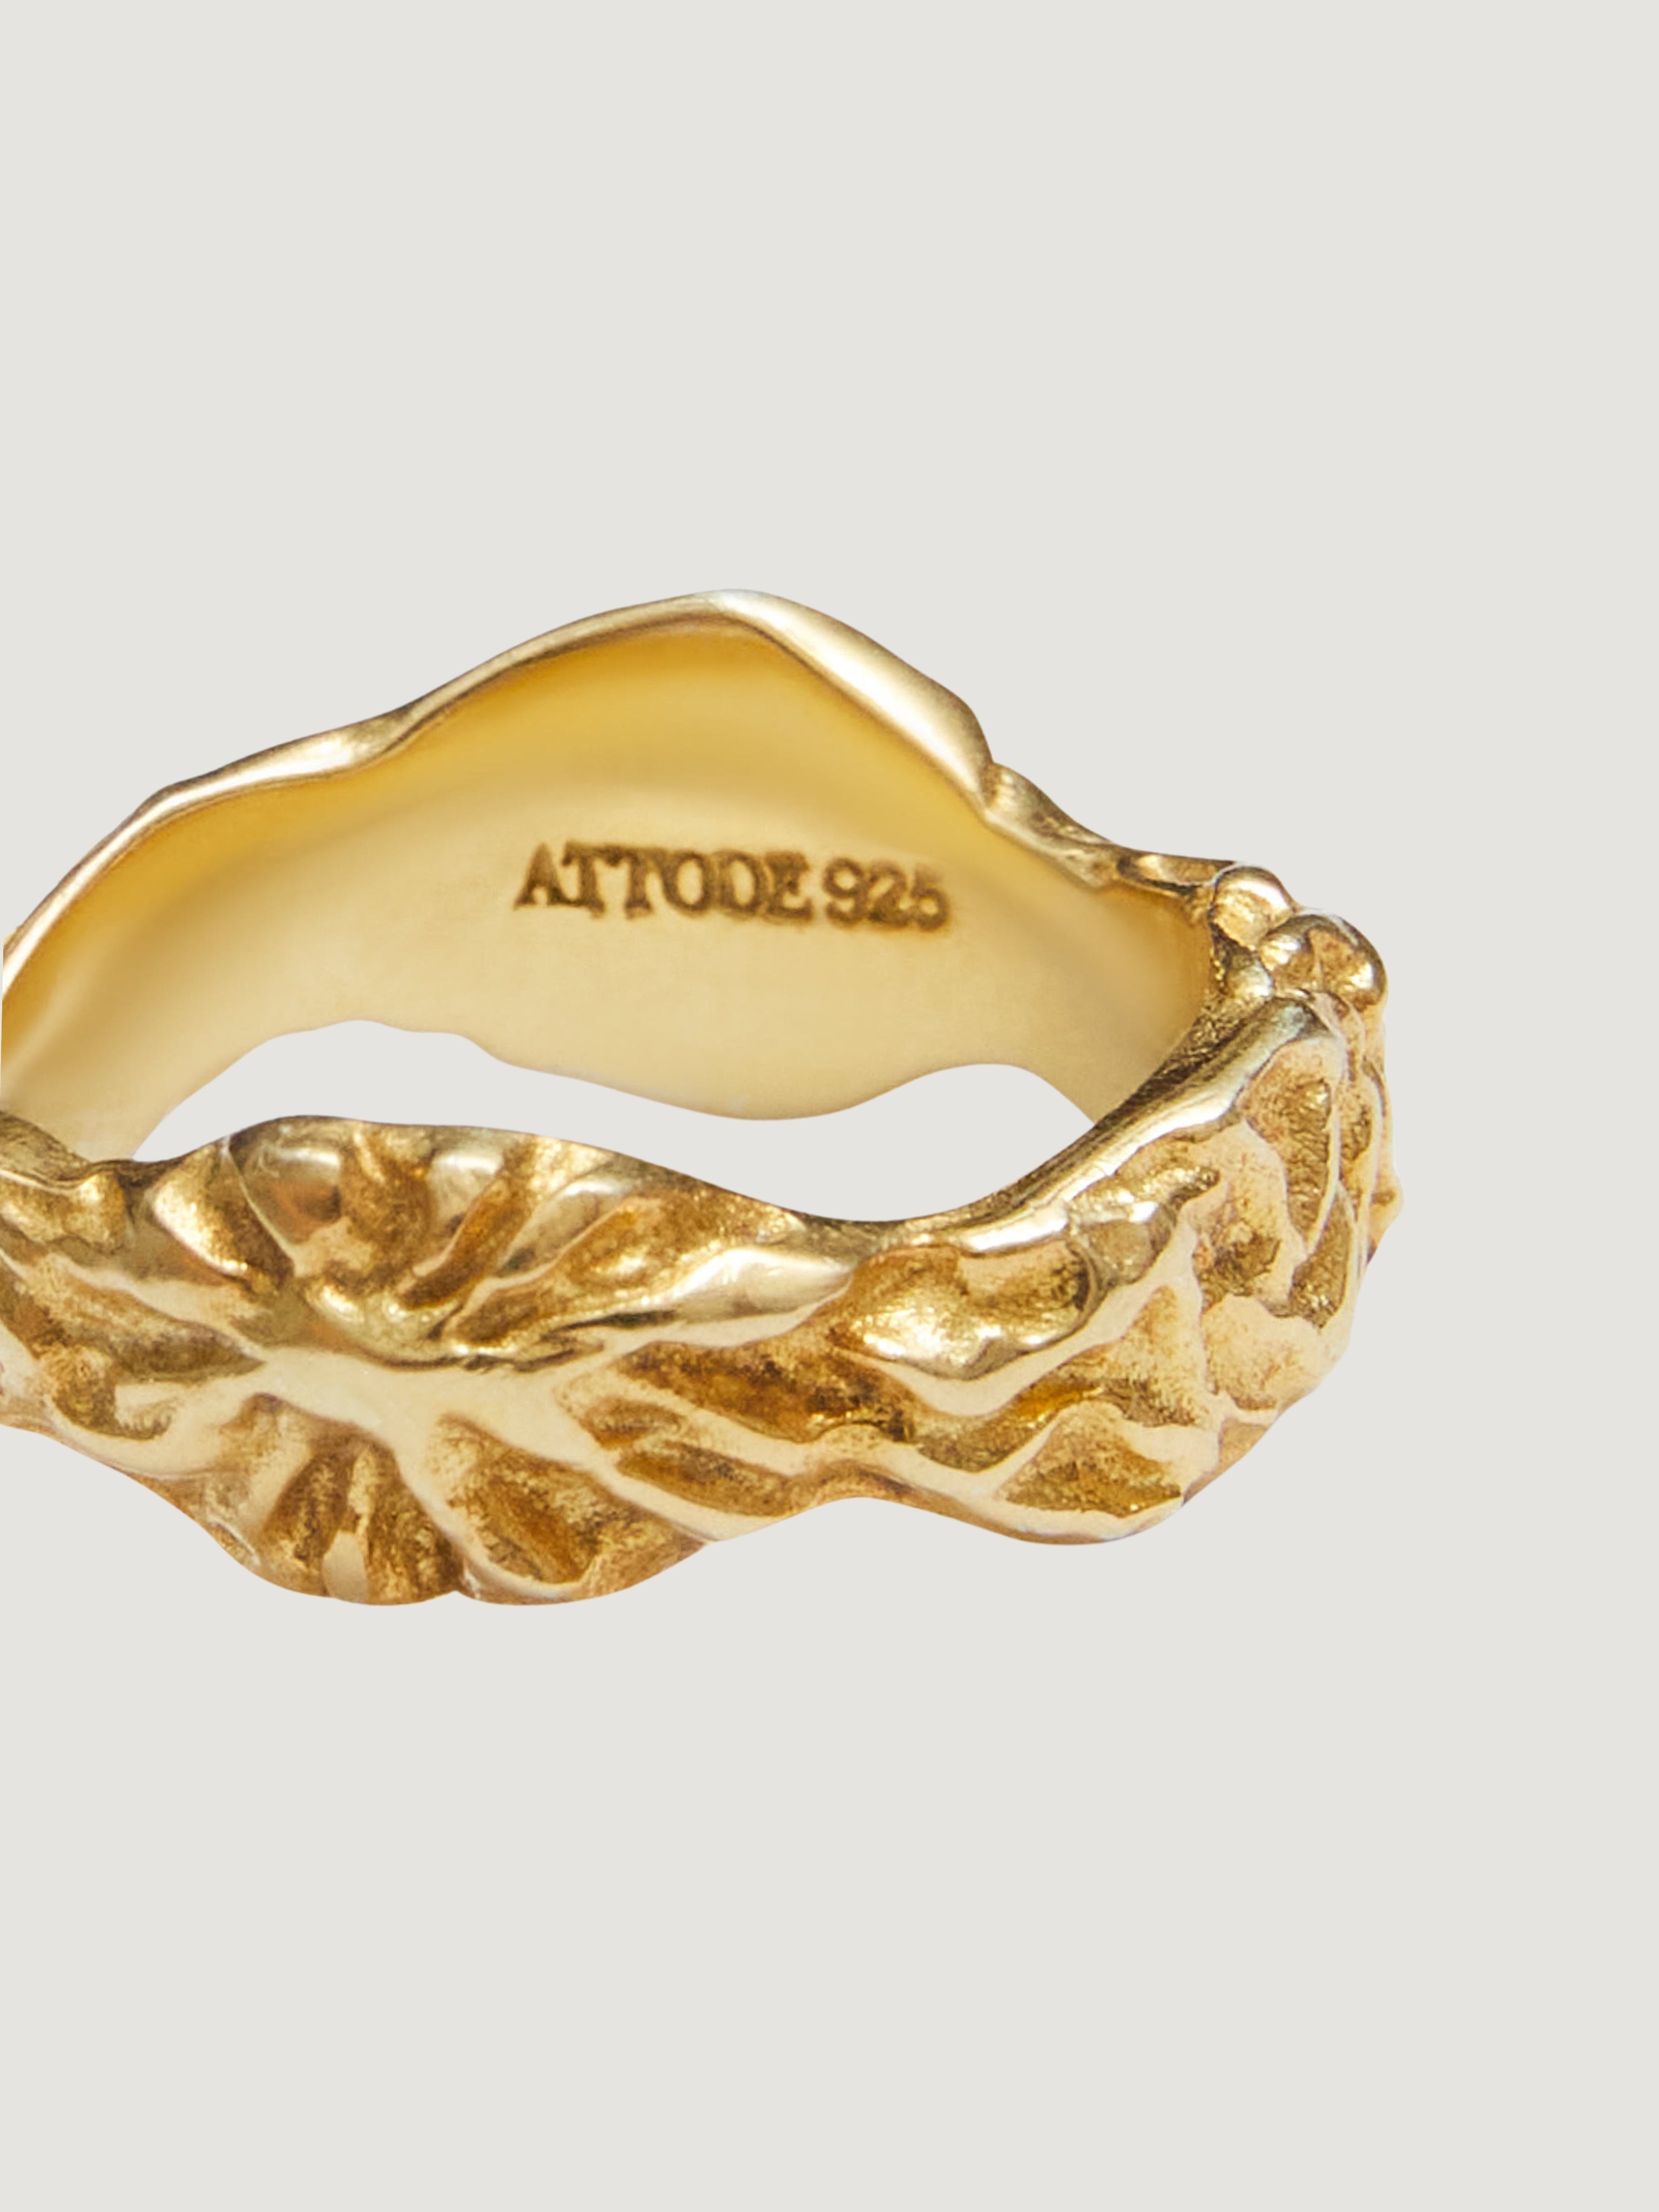 LARGE EVERYDAY RING GOLD - ATTODE